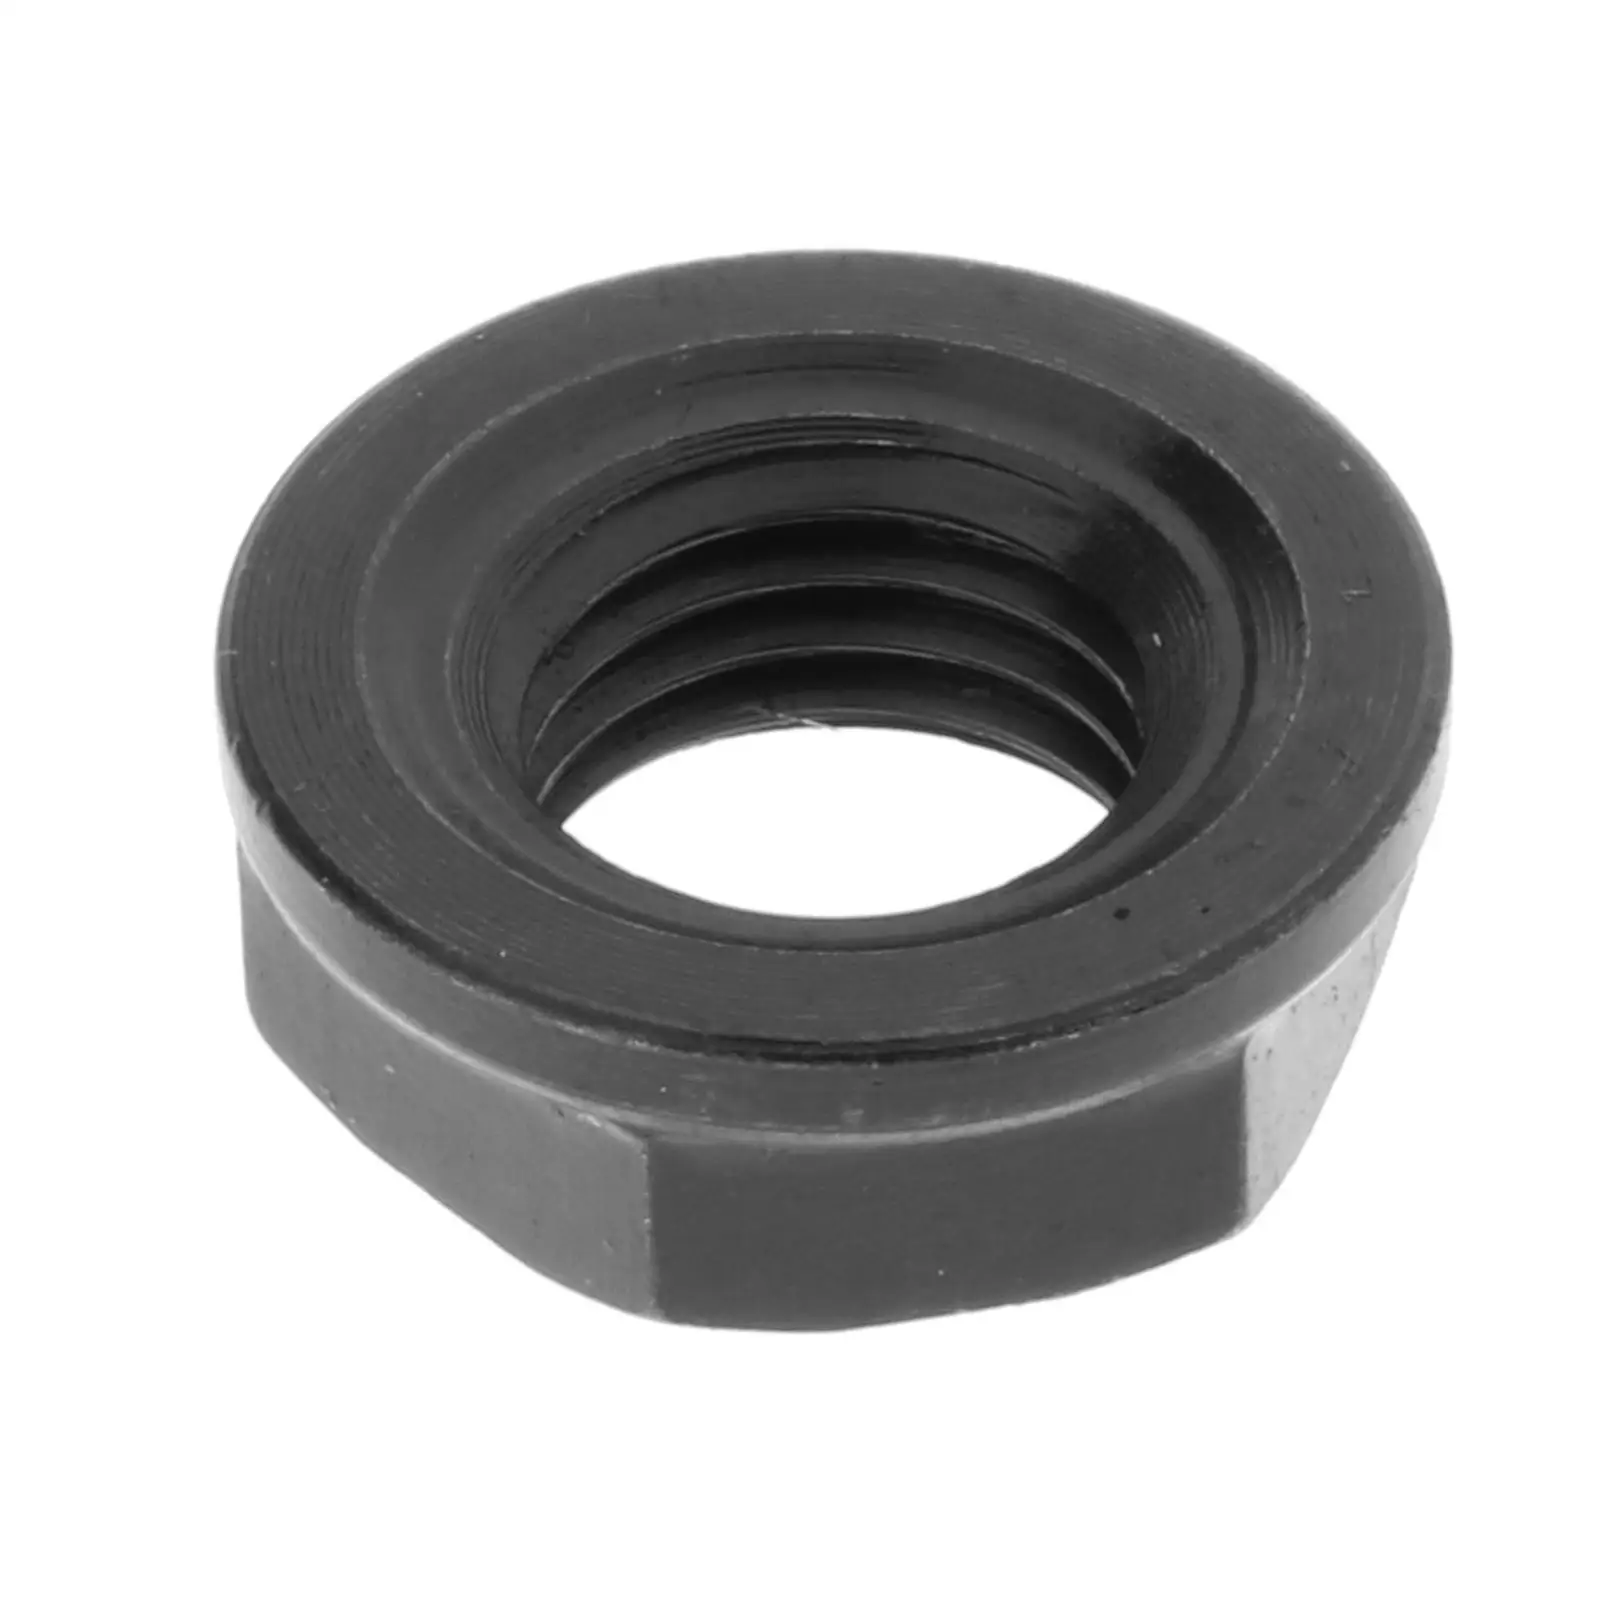 90179-08M06 Driver Shaft Nut for Yamaha Outboard Parts 8 9.9 15 20HP Parsun Hidea  Motocycle Accessory Replacements